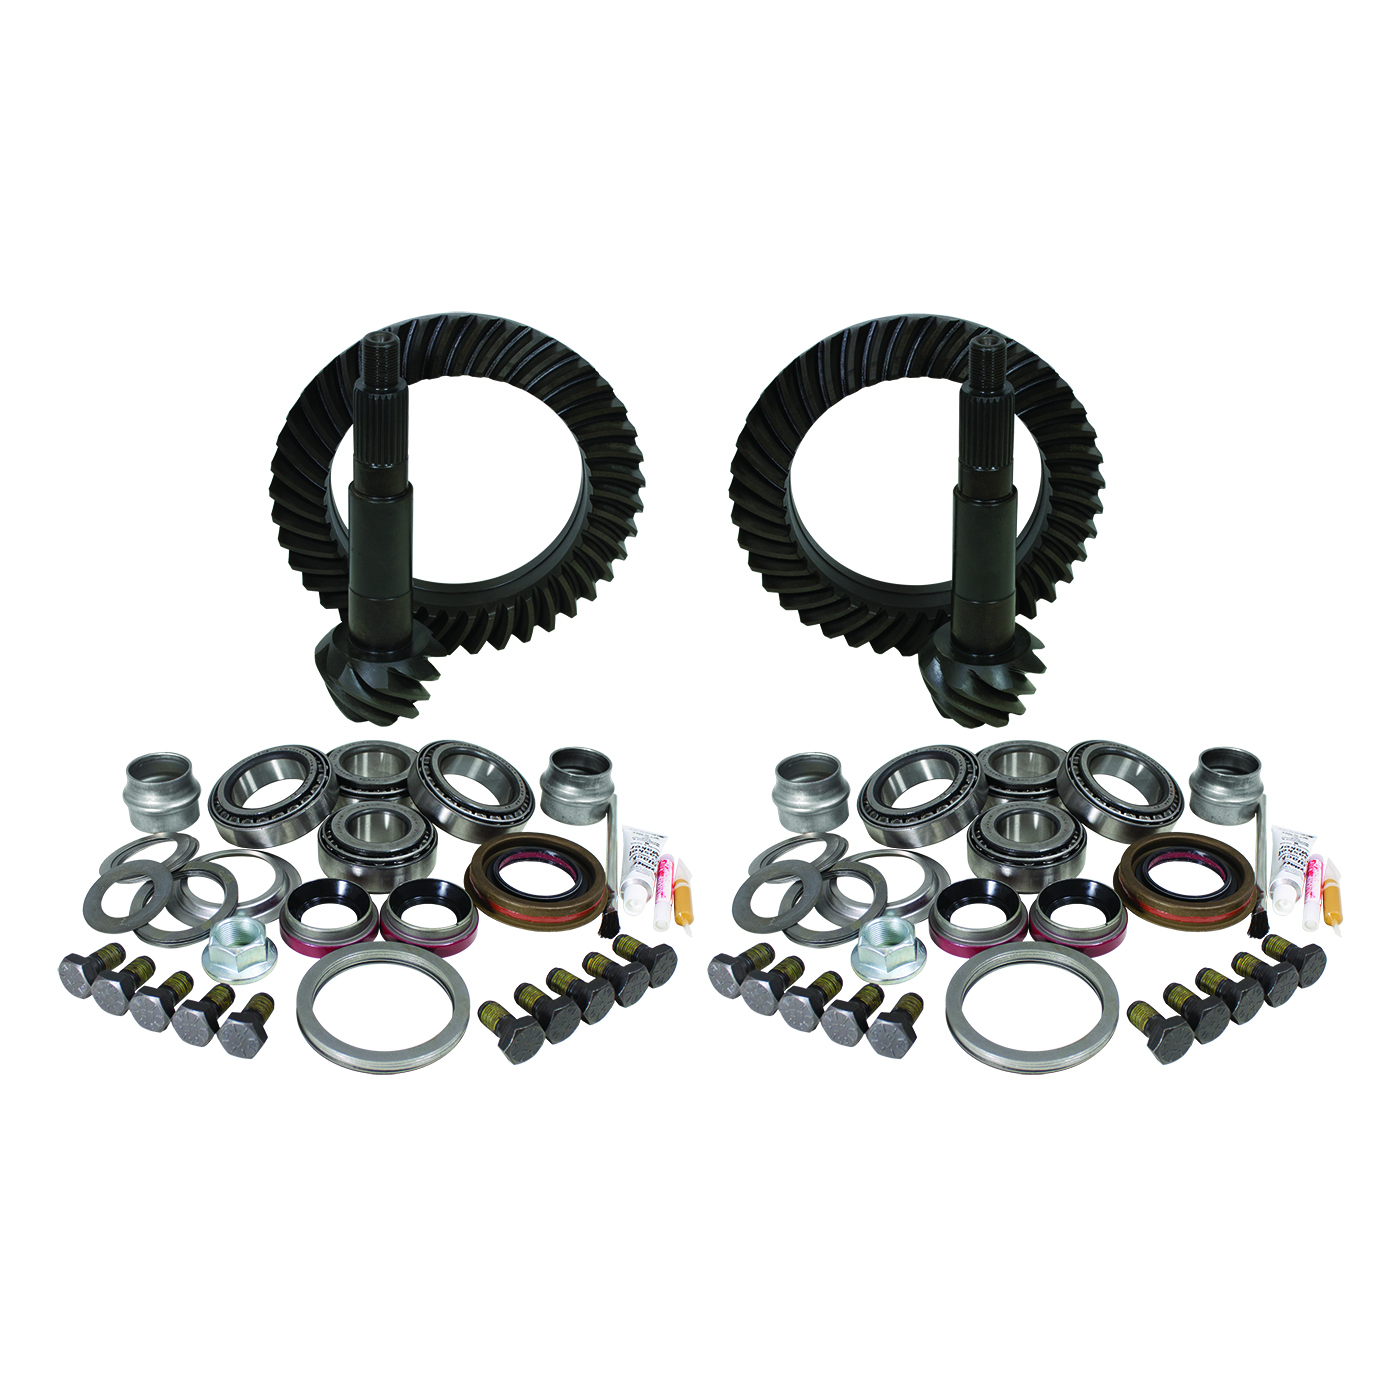 USA Standard Gear & Install Kit package for Jeep TJ Rubicon, 5.13 ratio